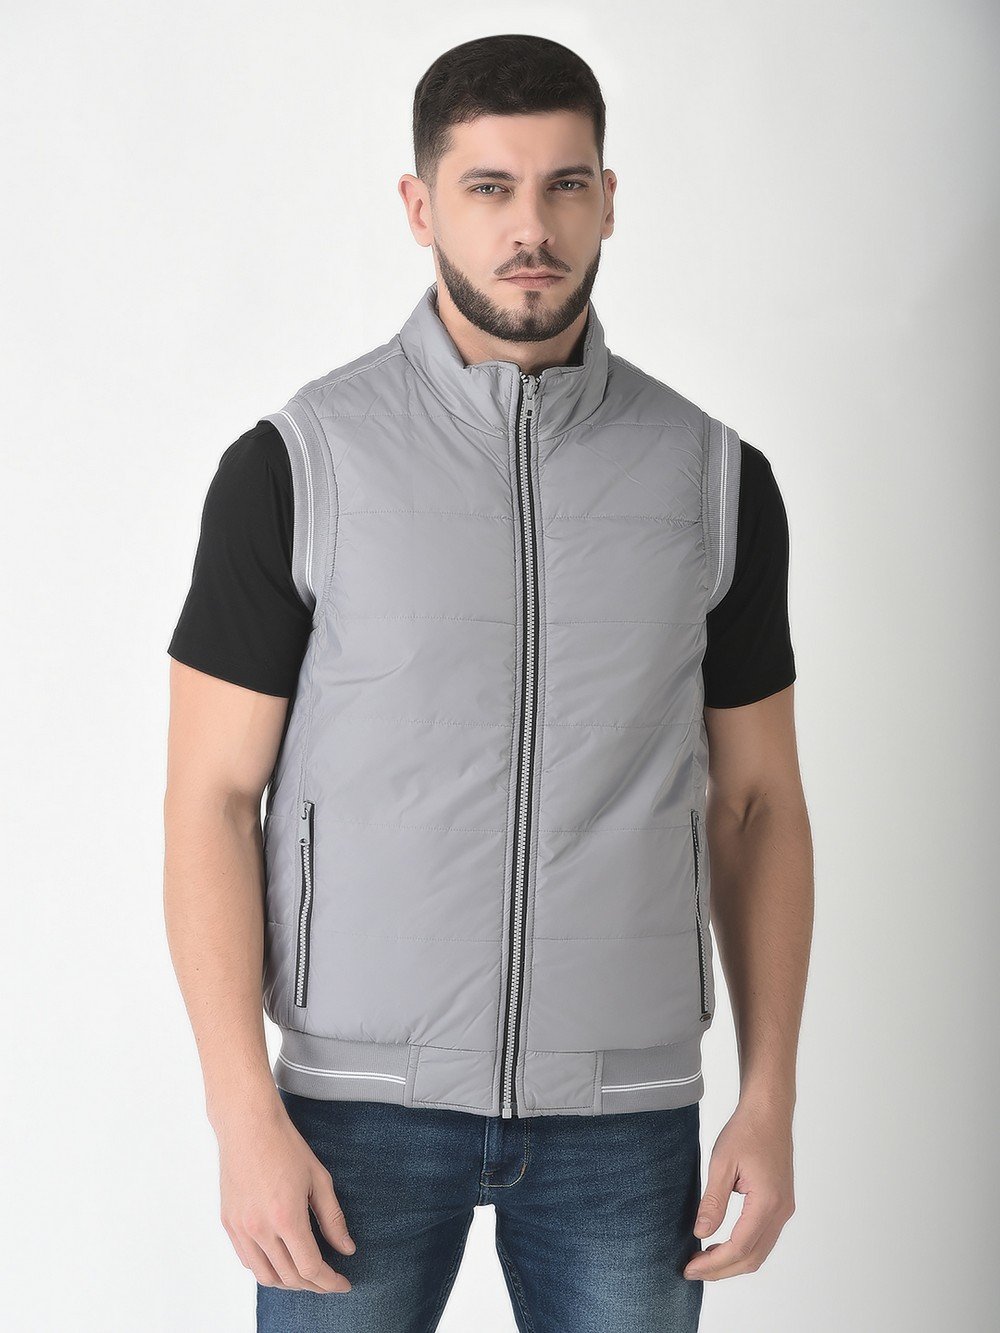 Experience more than 151 sleeveless jacket for men latest